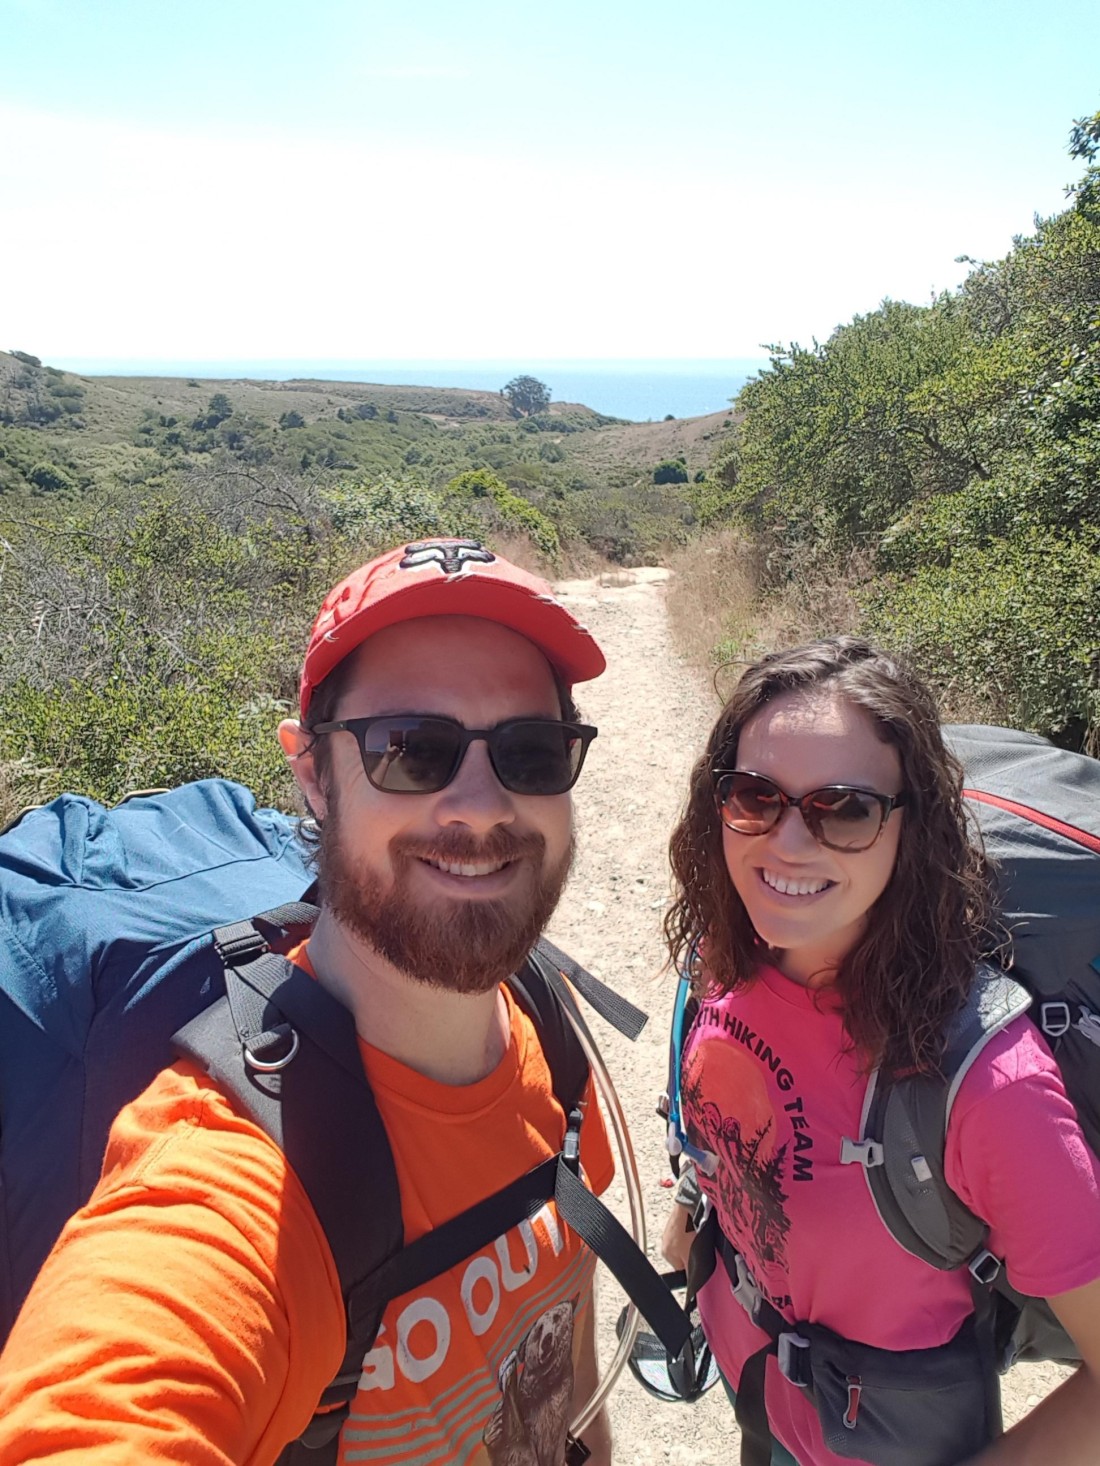 Getting ready to hike! Point Reyes, CA